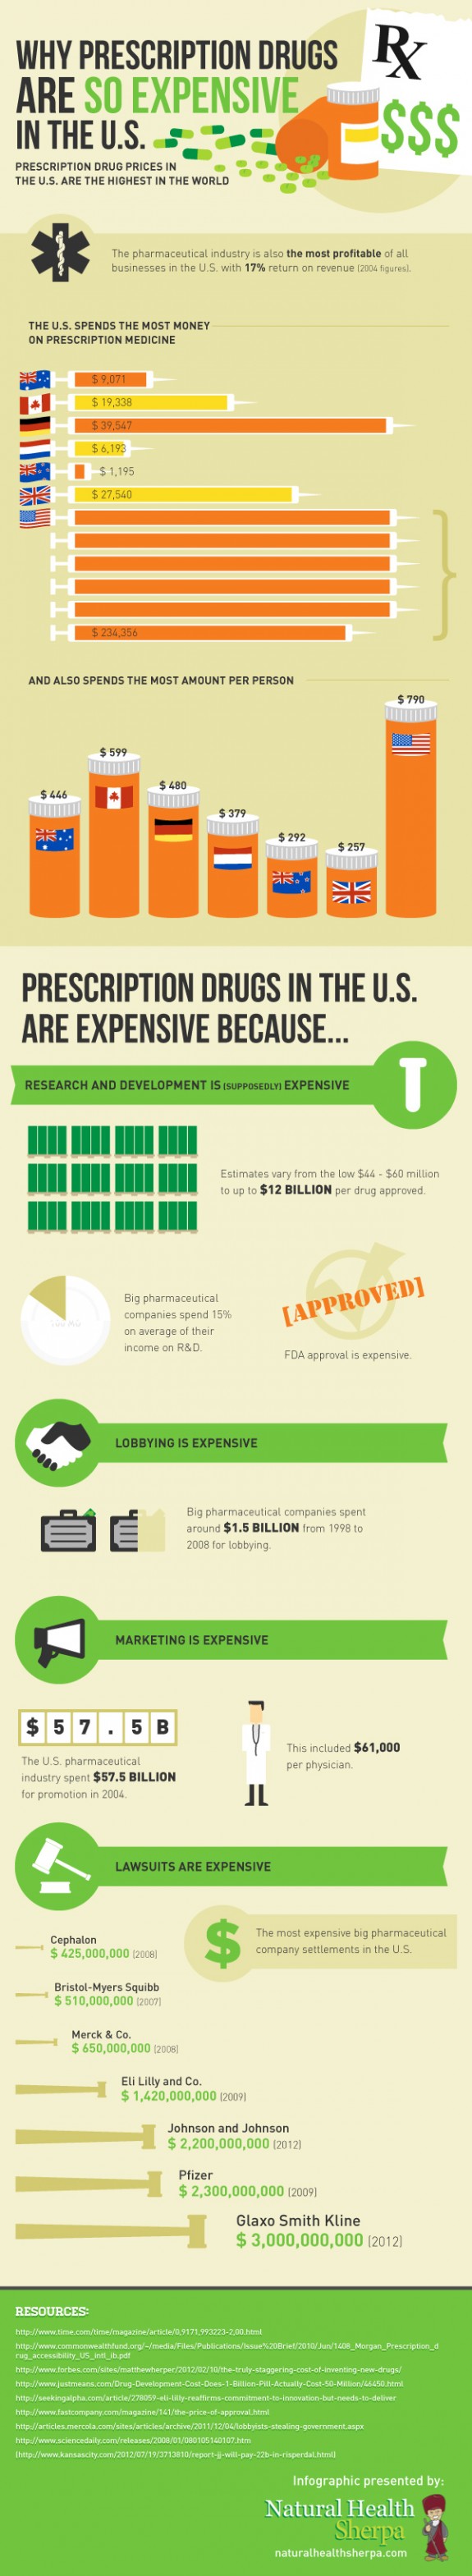 Infographic for Prescription Drugs Infographic